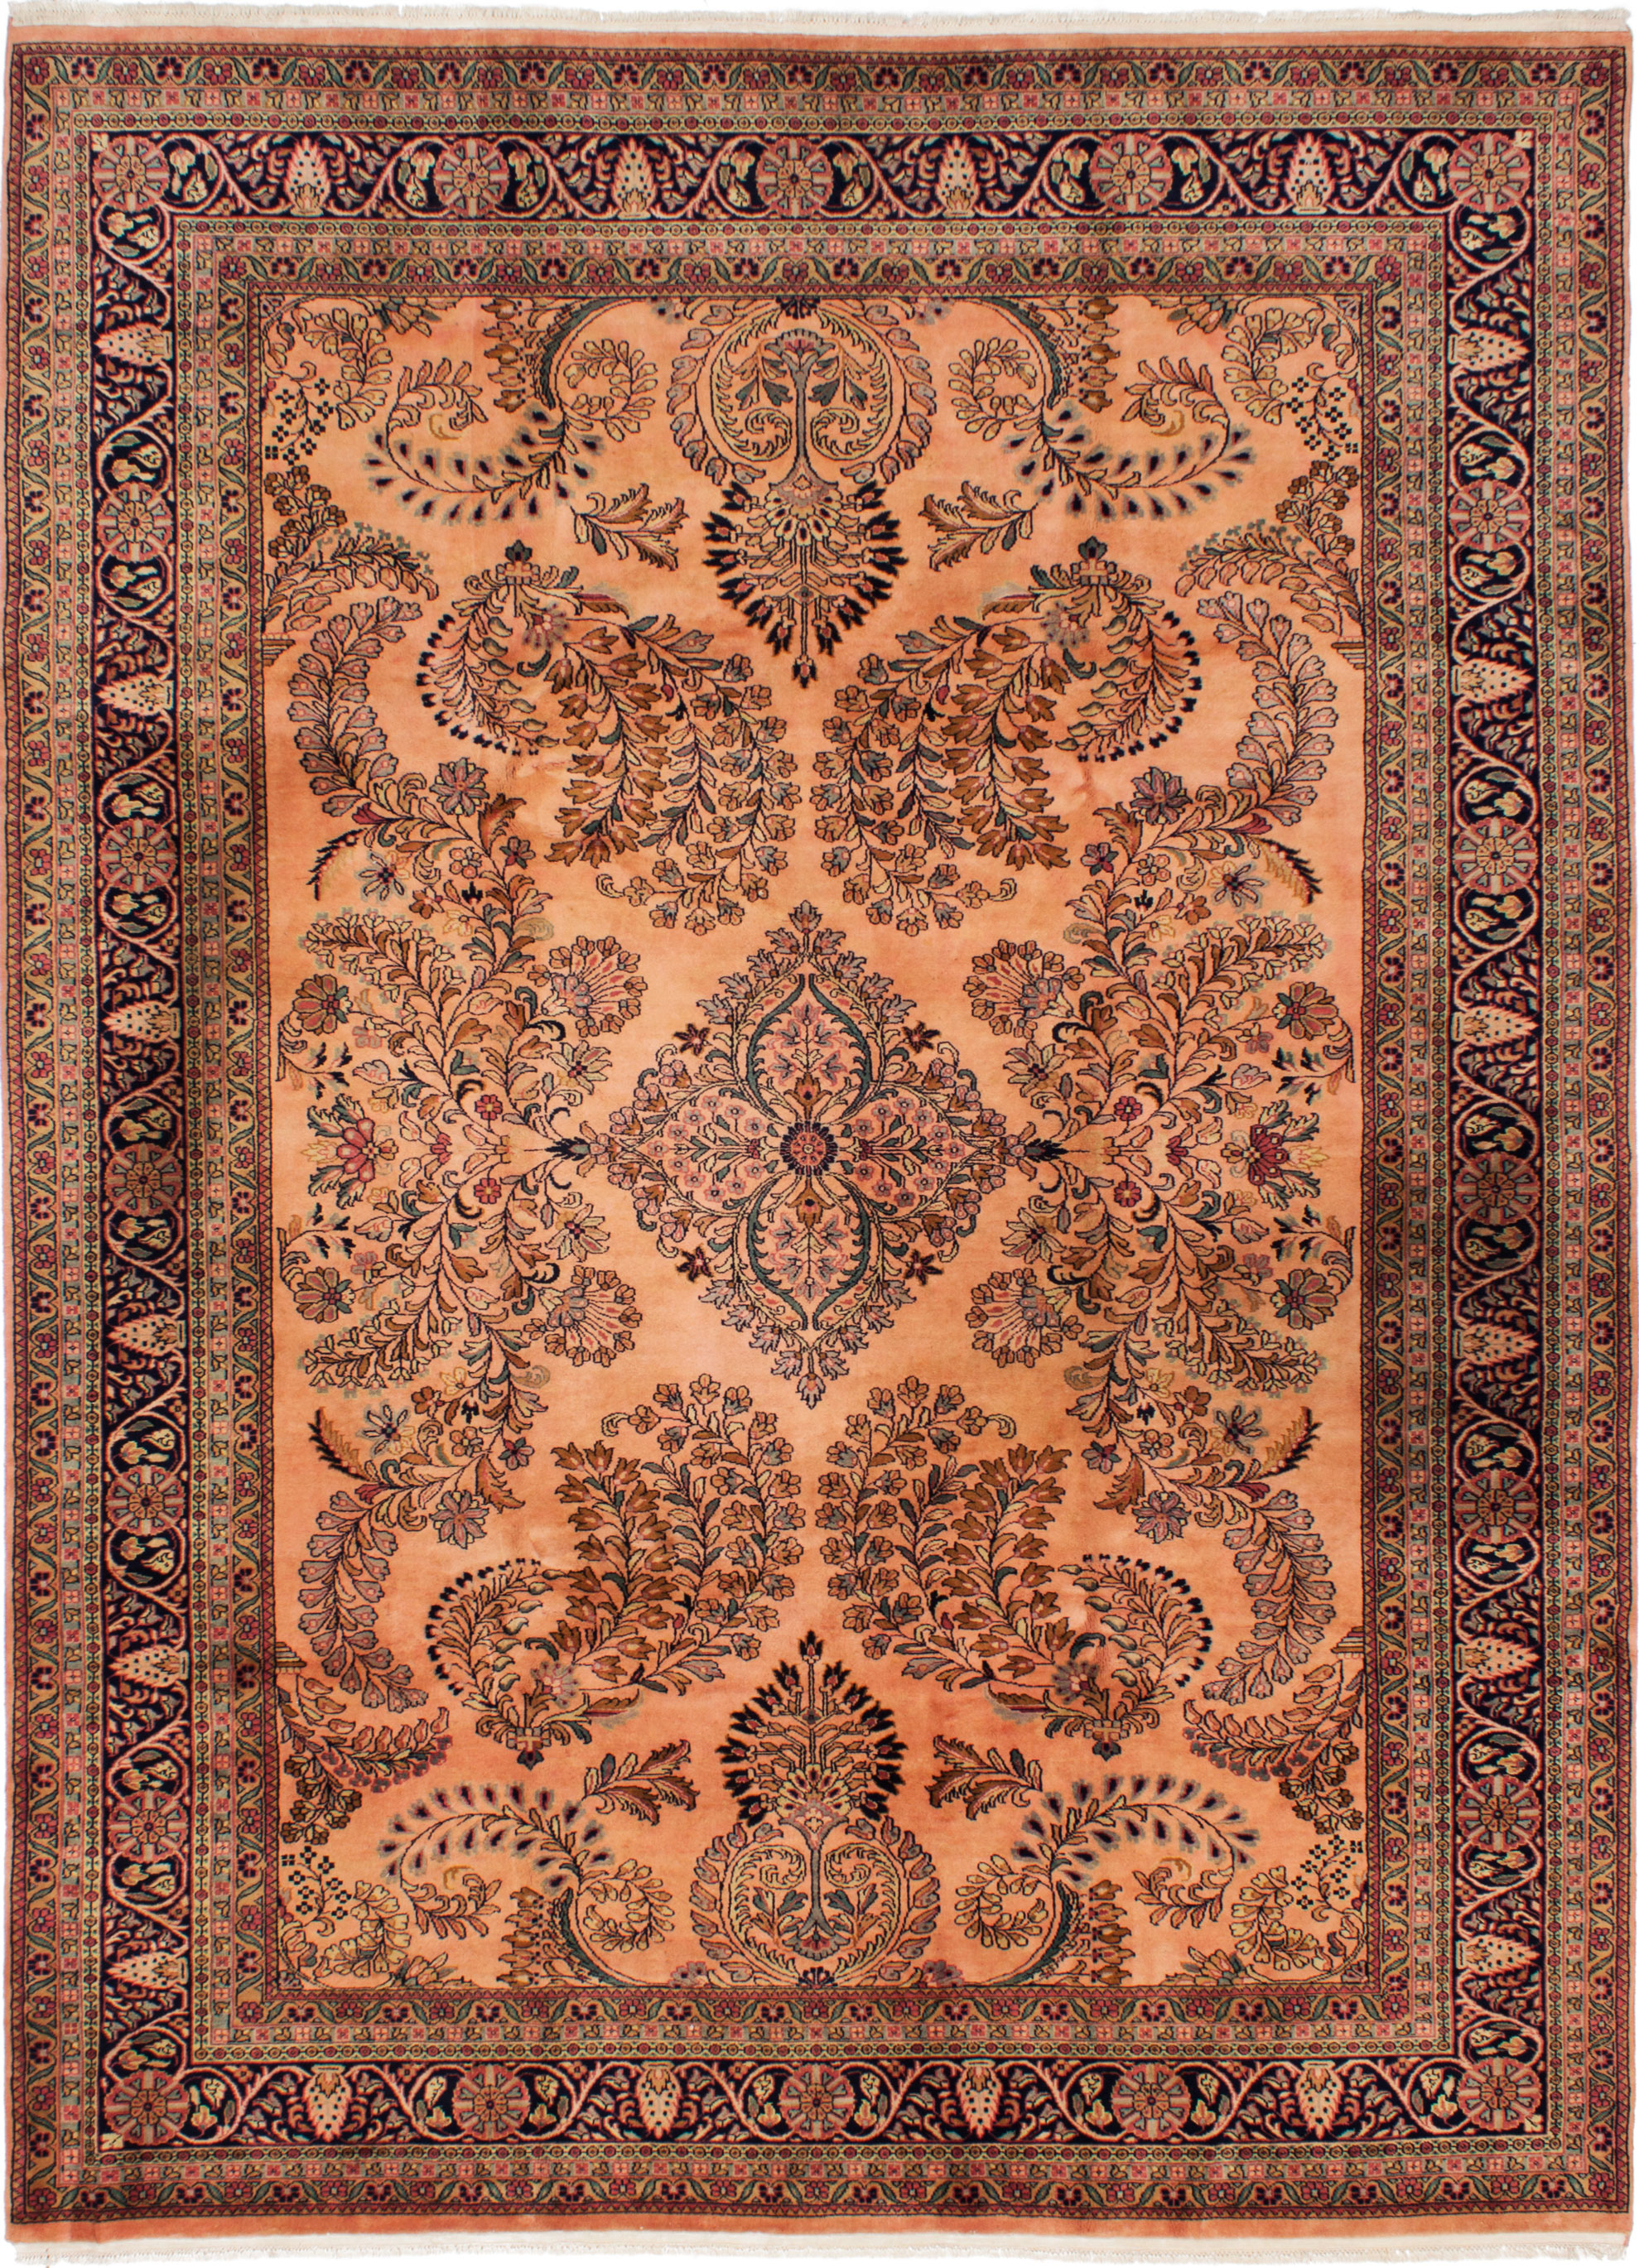 Hand-knotted Royal Sarough Copper Wool Rug 7'9" x 10'8" Size: 7'9" x 10'8"  